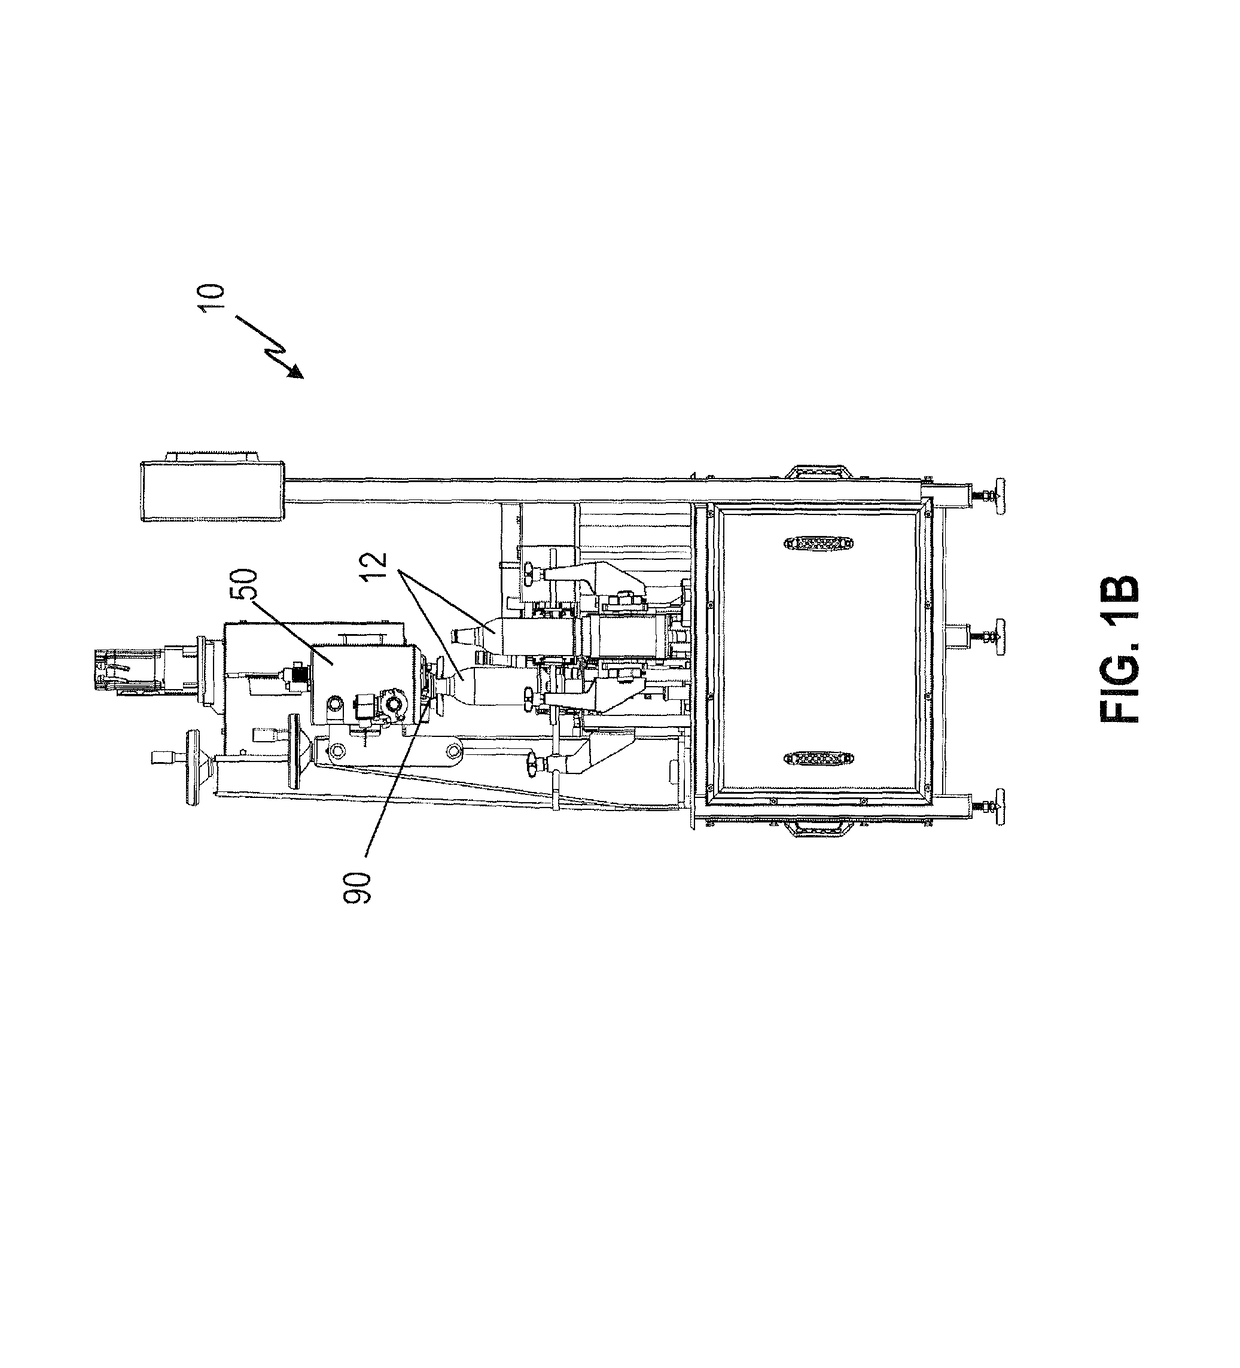 Multi-container filling machine, valves, and related technologies